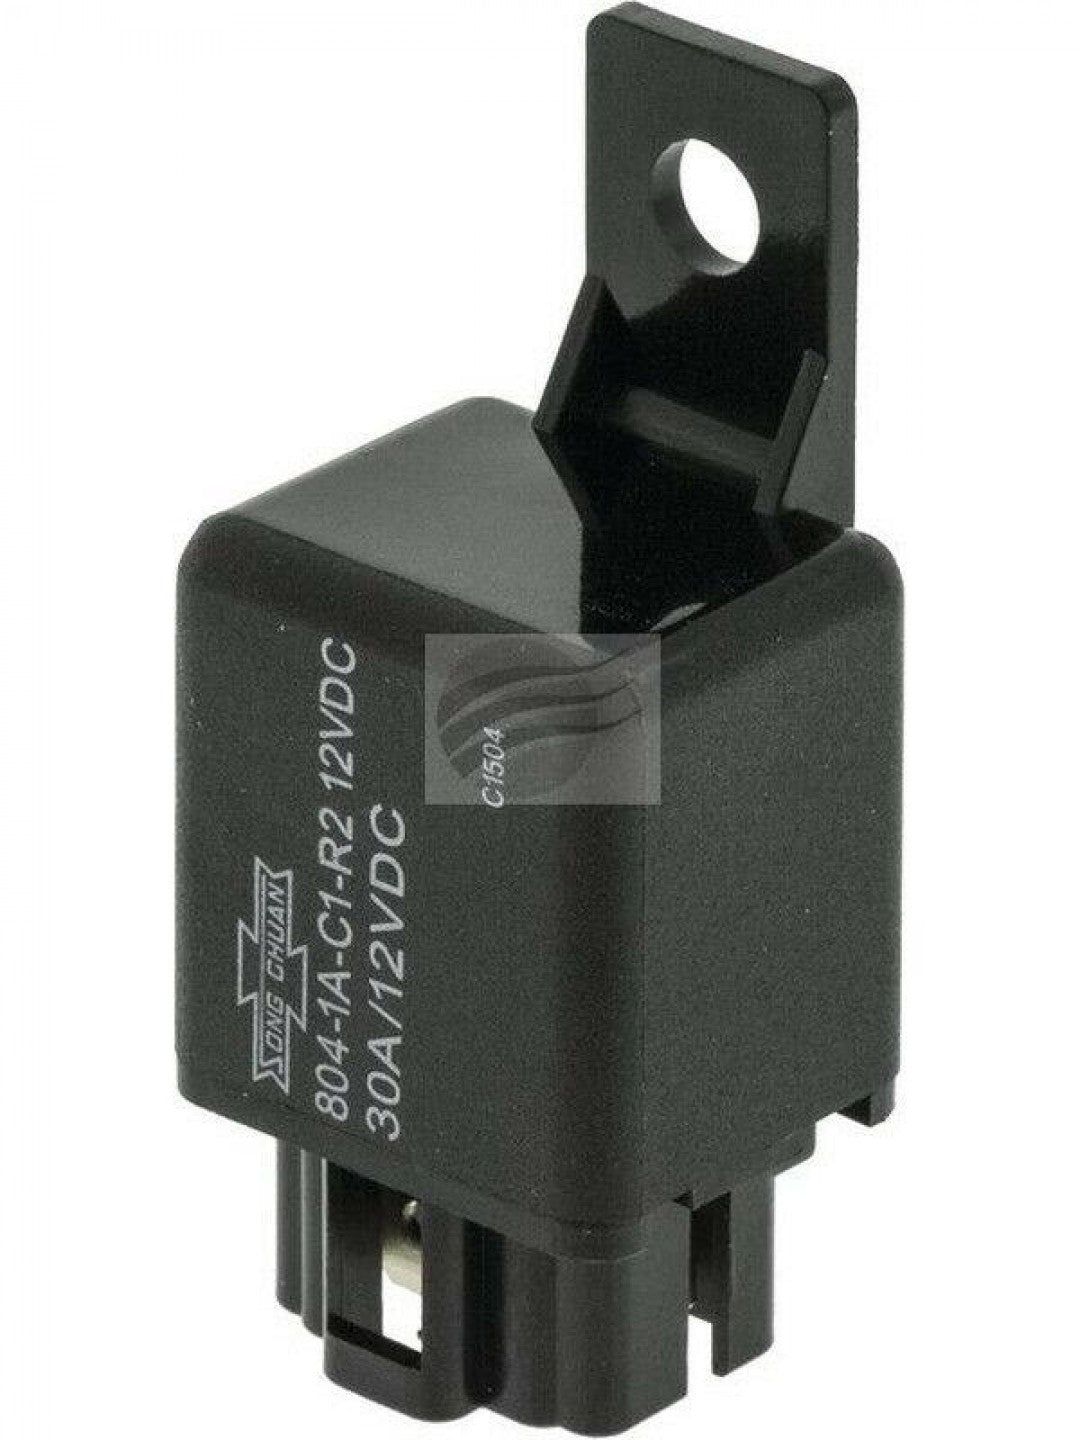 Jaylec - Mini Relay 12 Volts 30 Amps 4 Pin 680 Ohms Resistor Type with Bracket